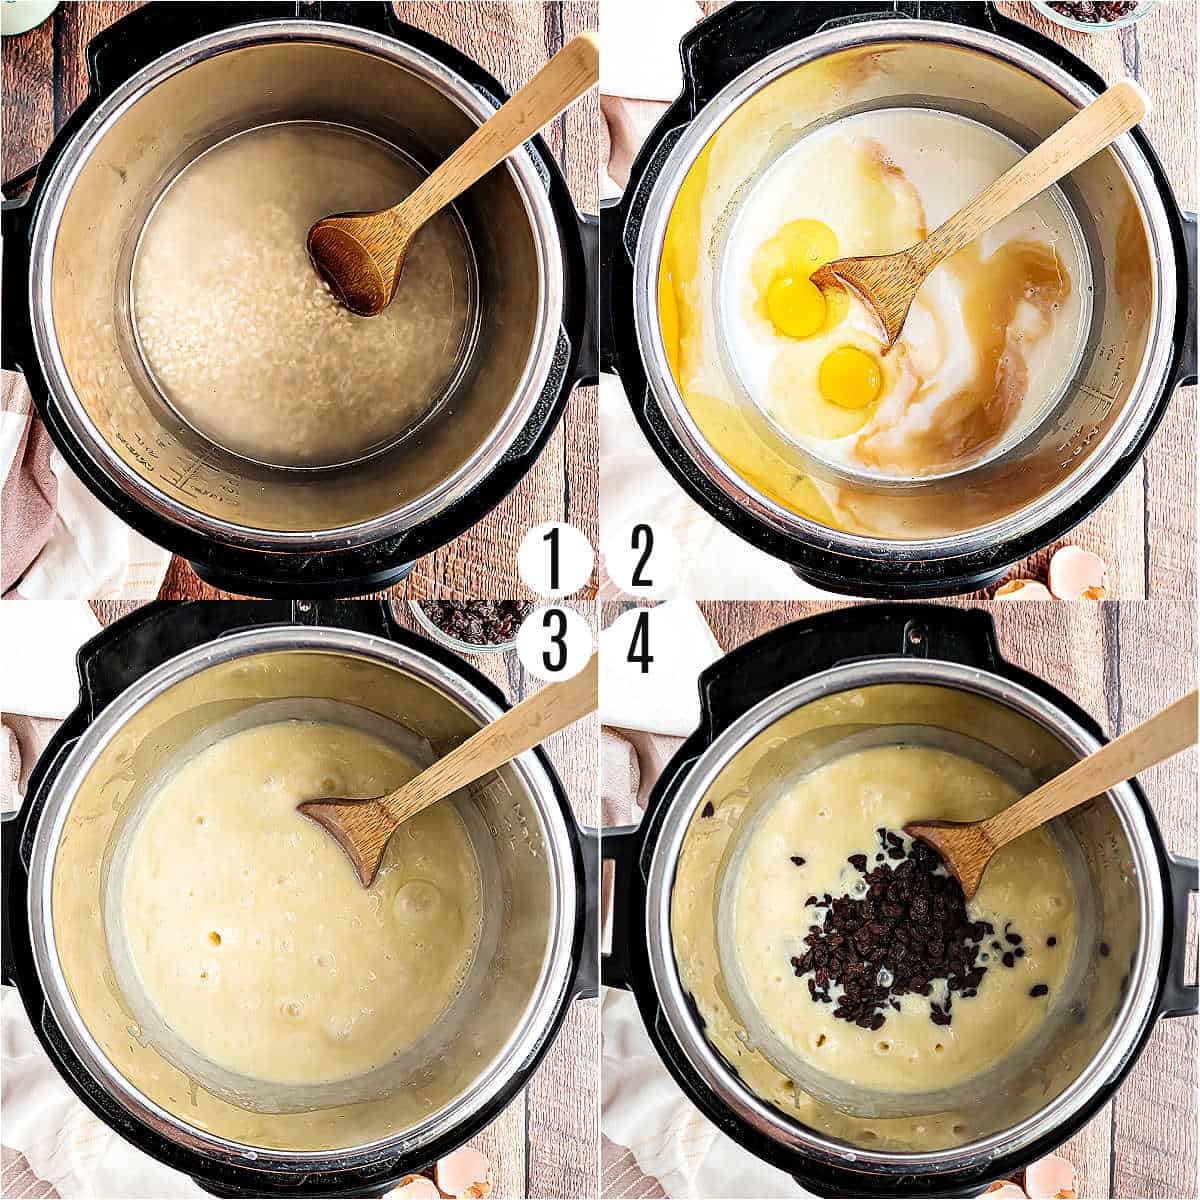 Step by step photos showing how to make rice pudding in the Instant pot.